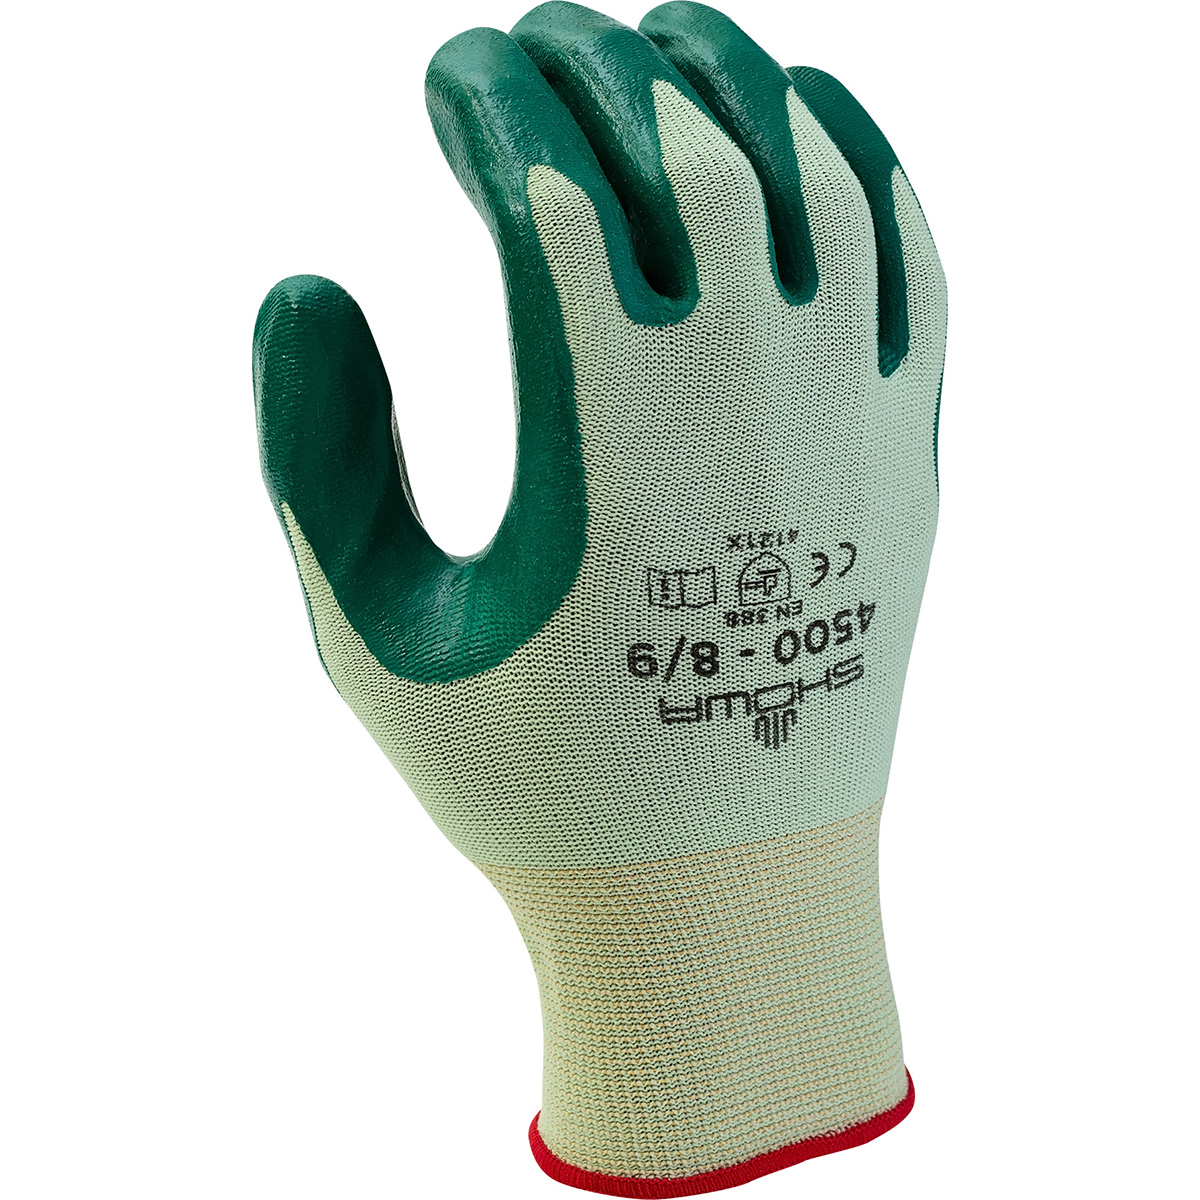 General purpose, nitrile-coated palm-dipped, light green w/green dip, nylon seamless shell, extra small - General Purpose